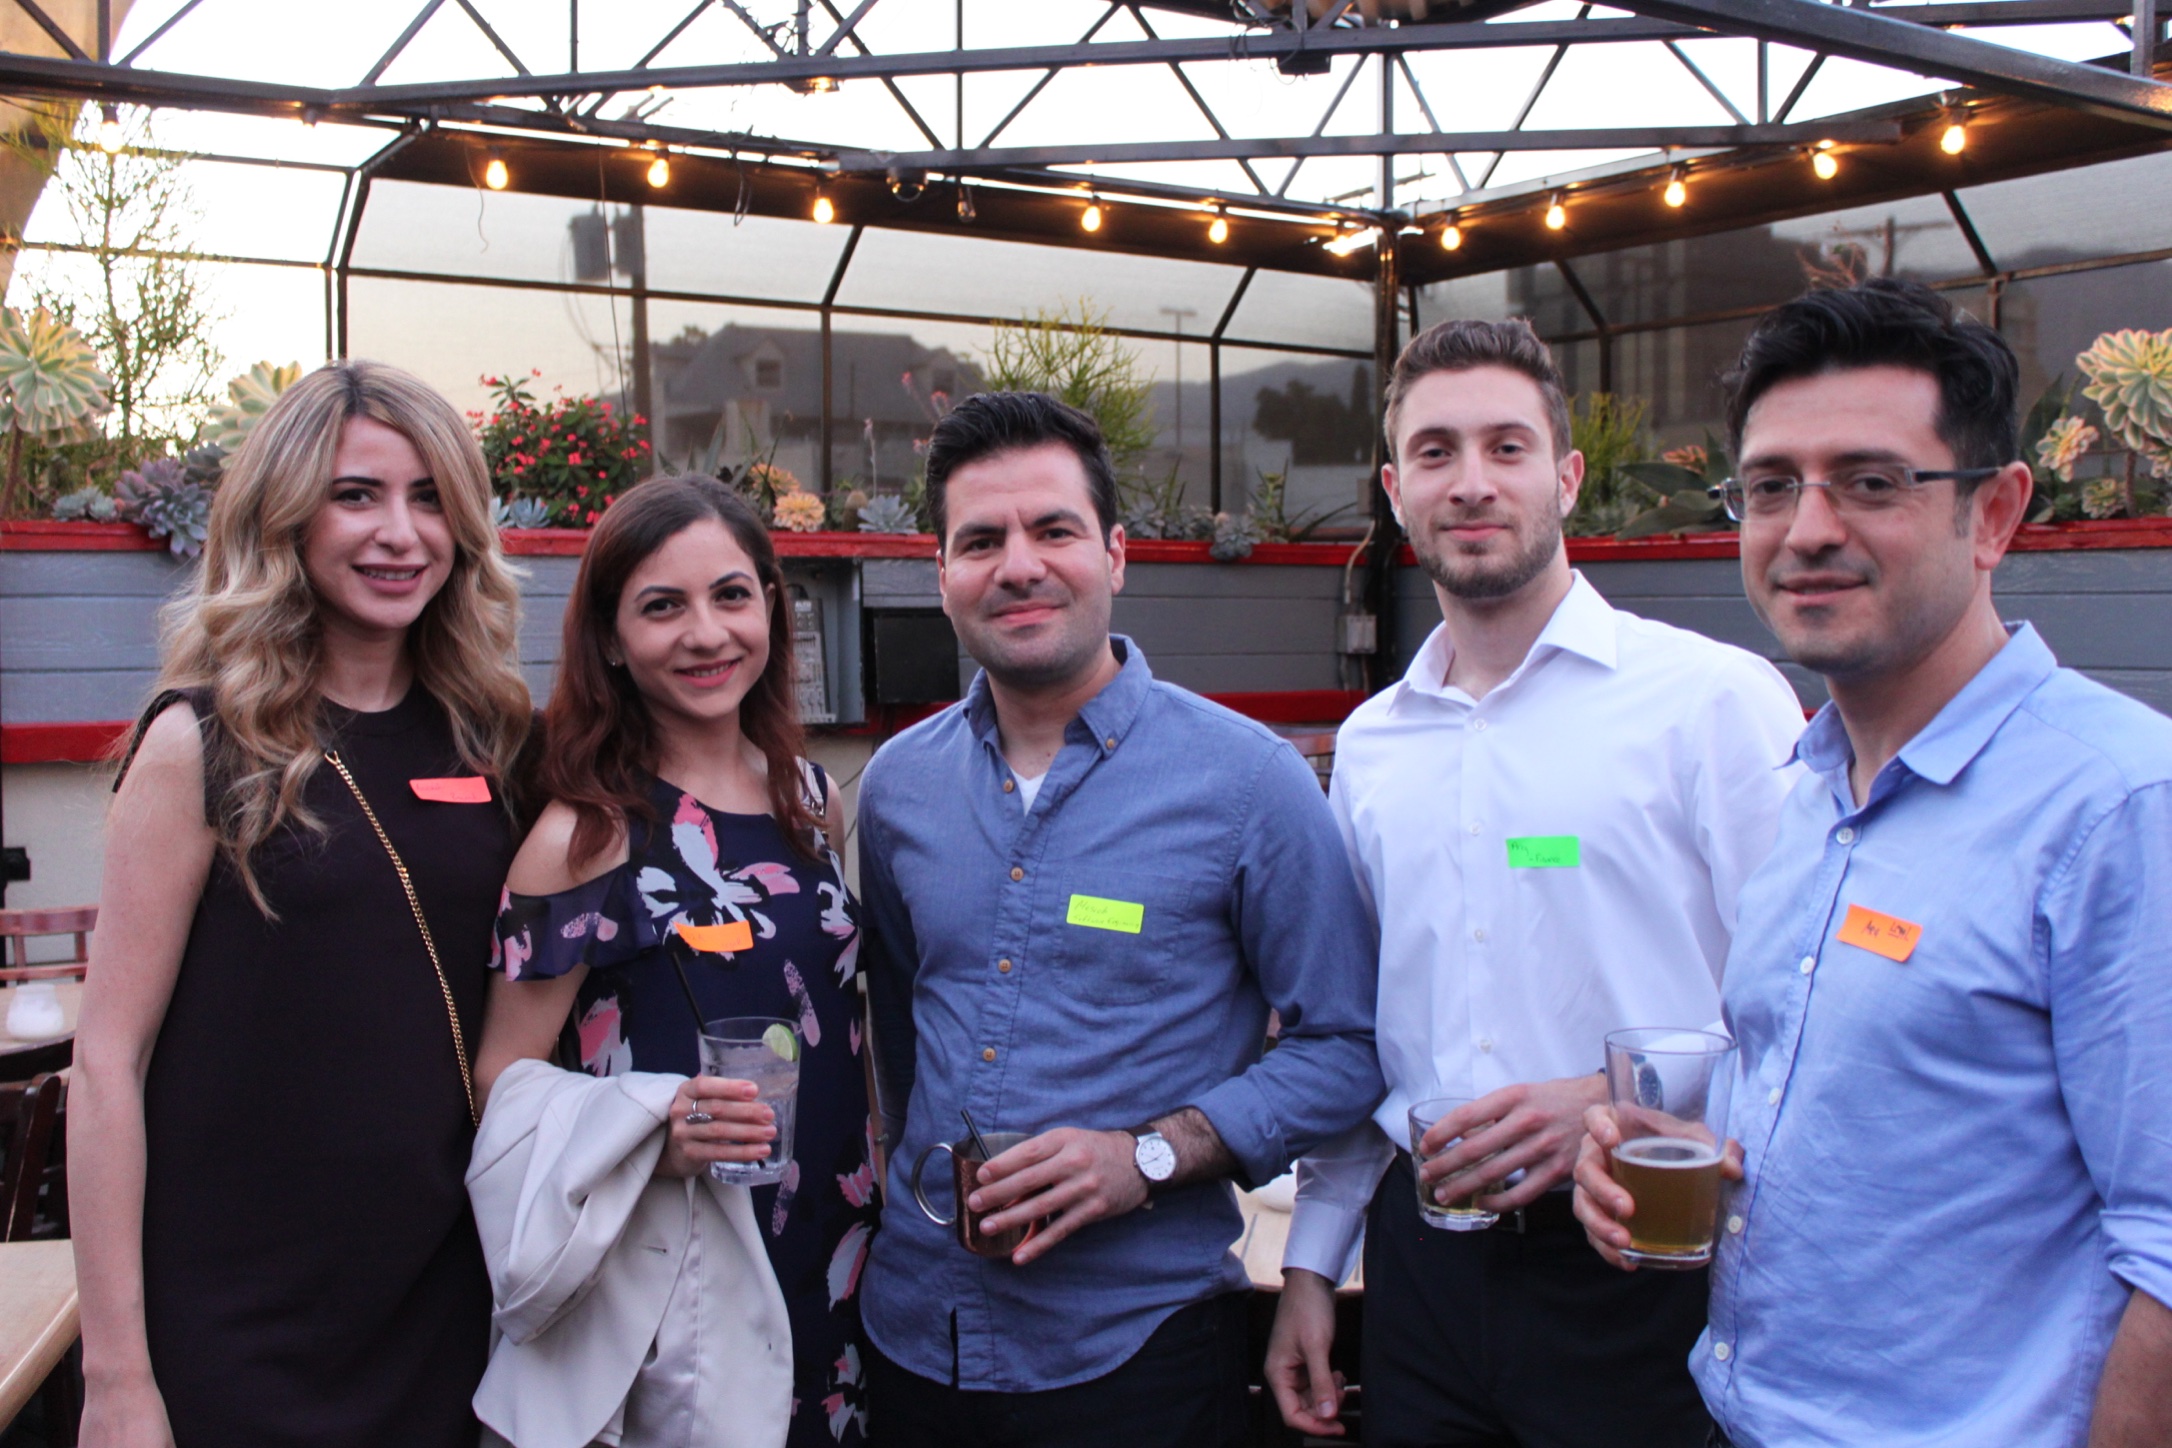 YPLA’s Colorful Networking Night